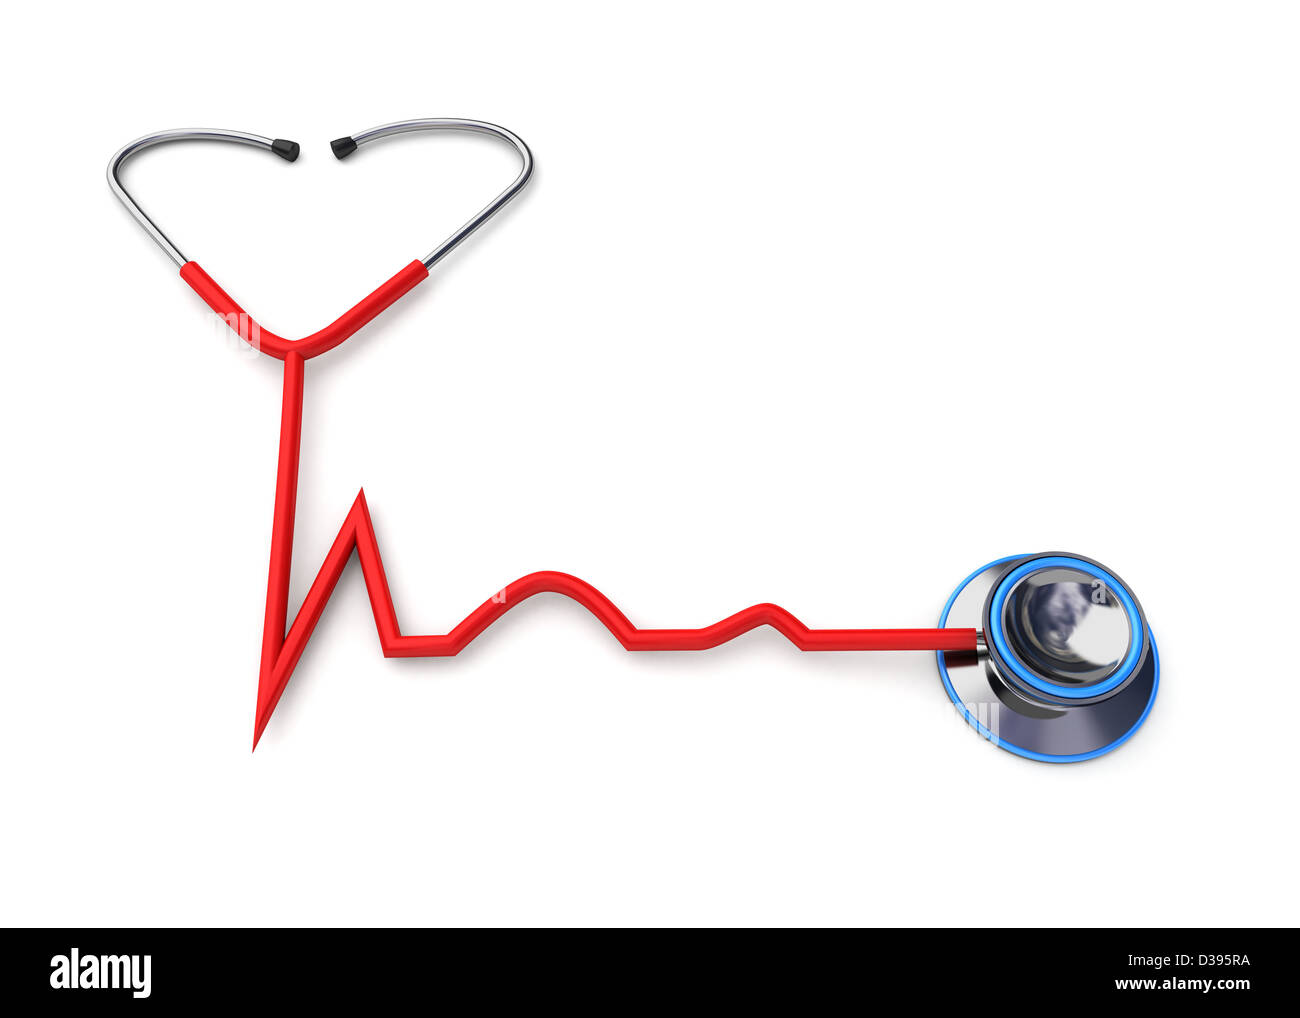 Red stethoscope forming a heartbeat shape with the tube over white background Stock Photo